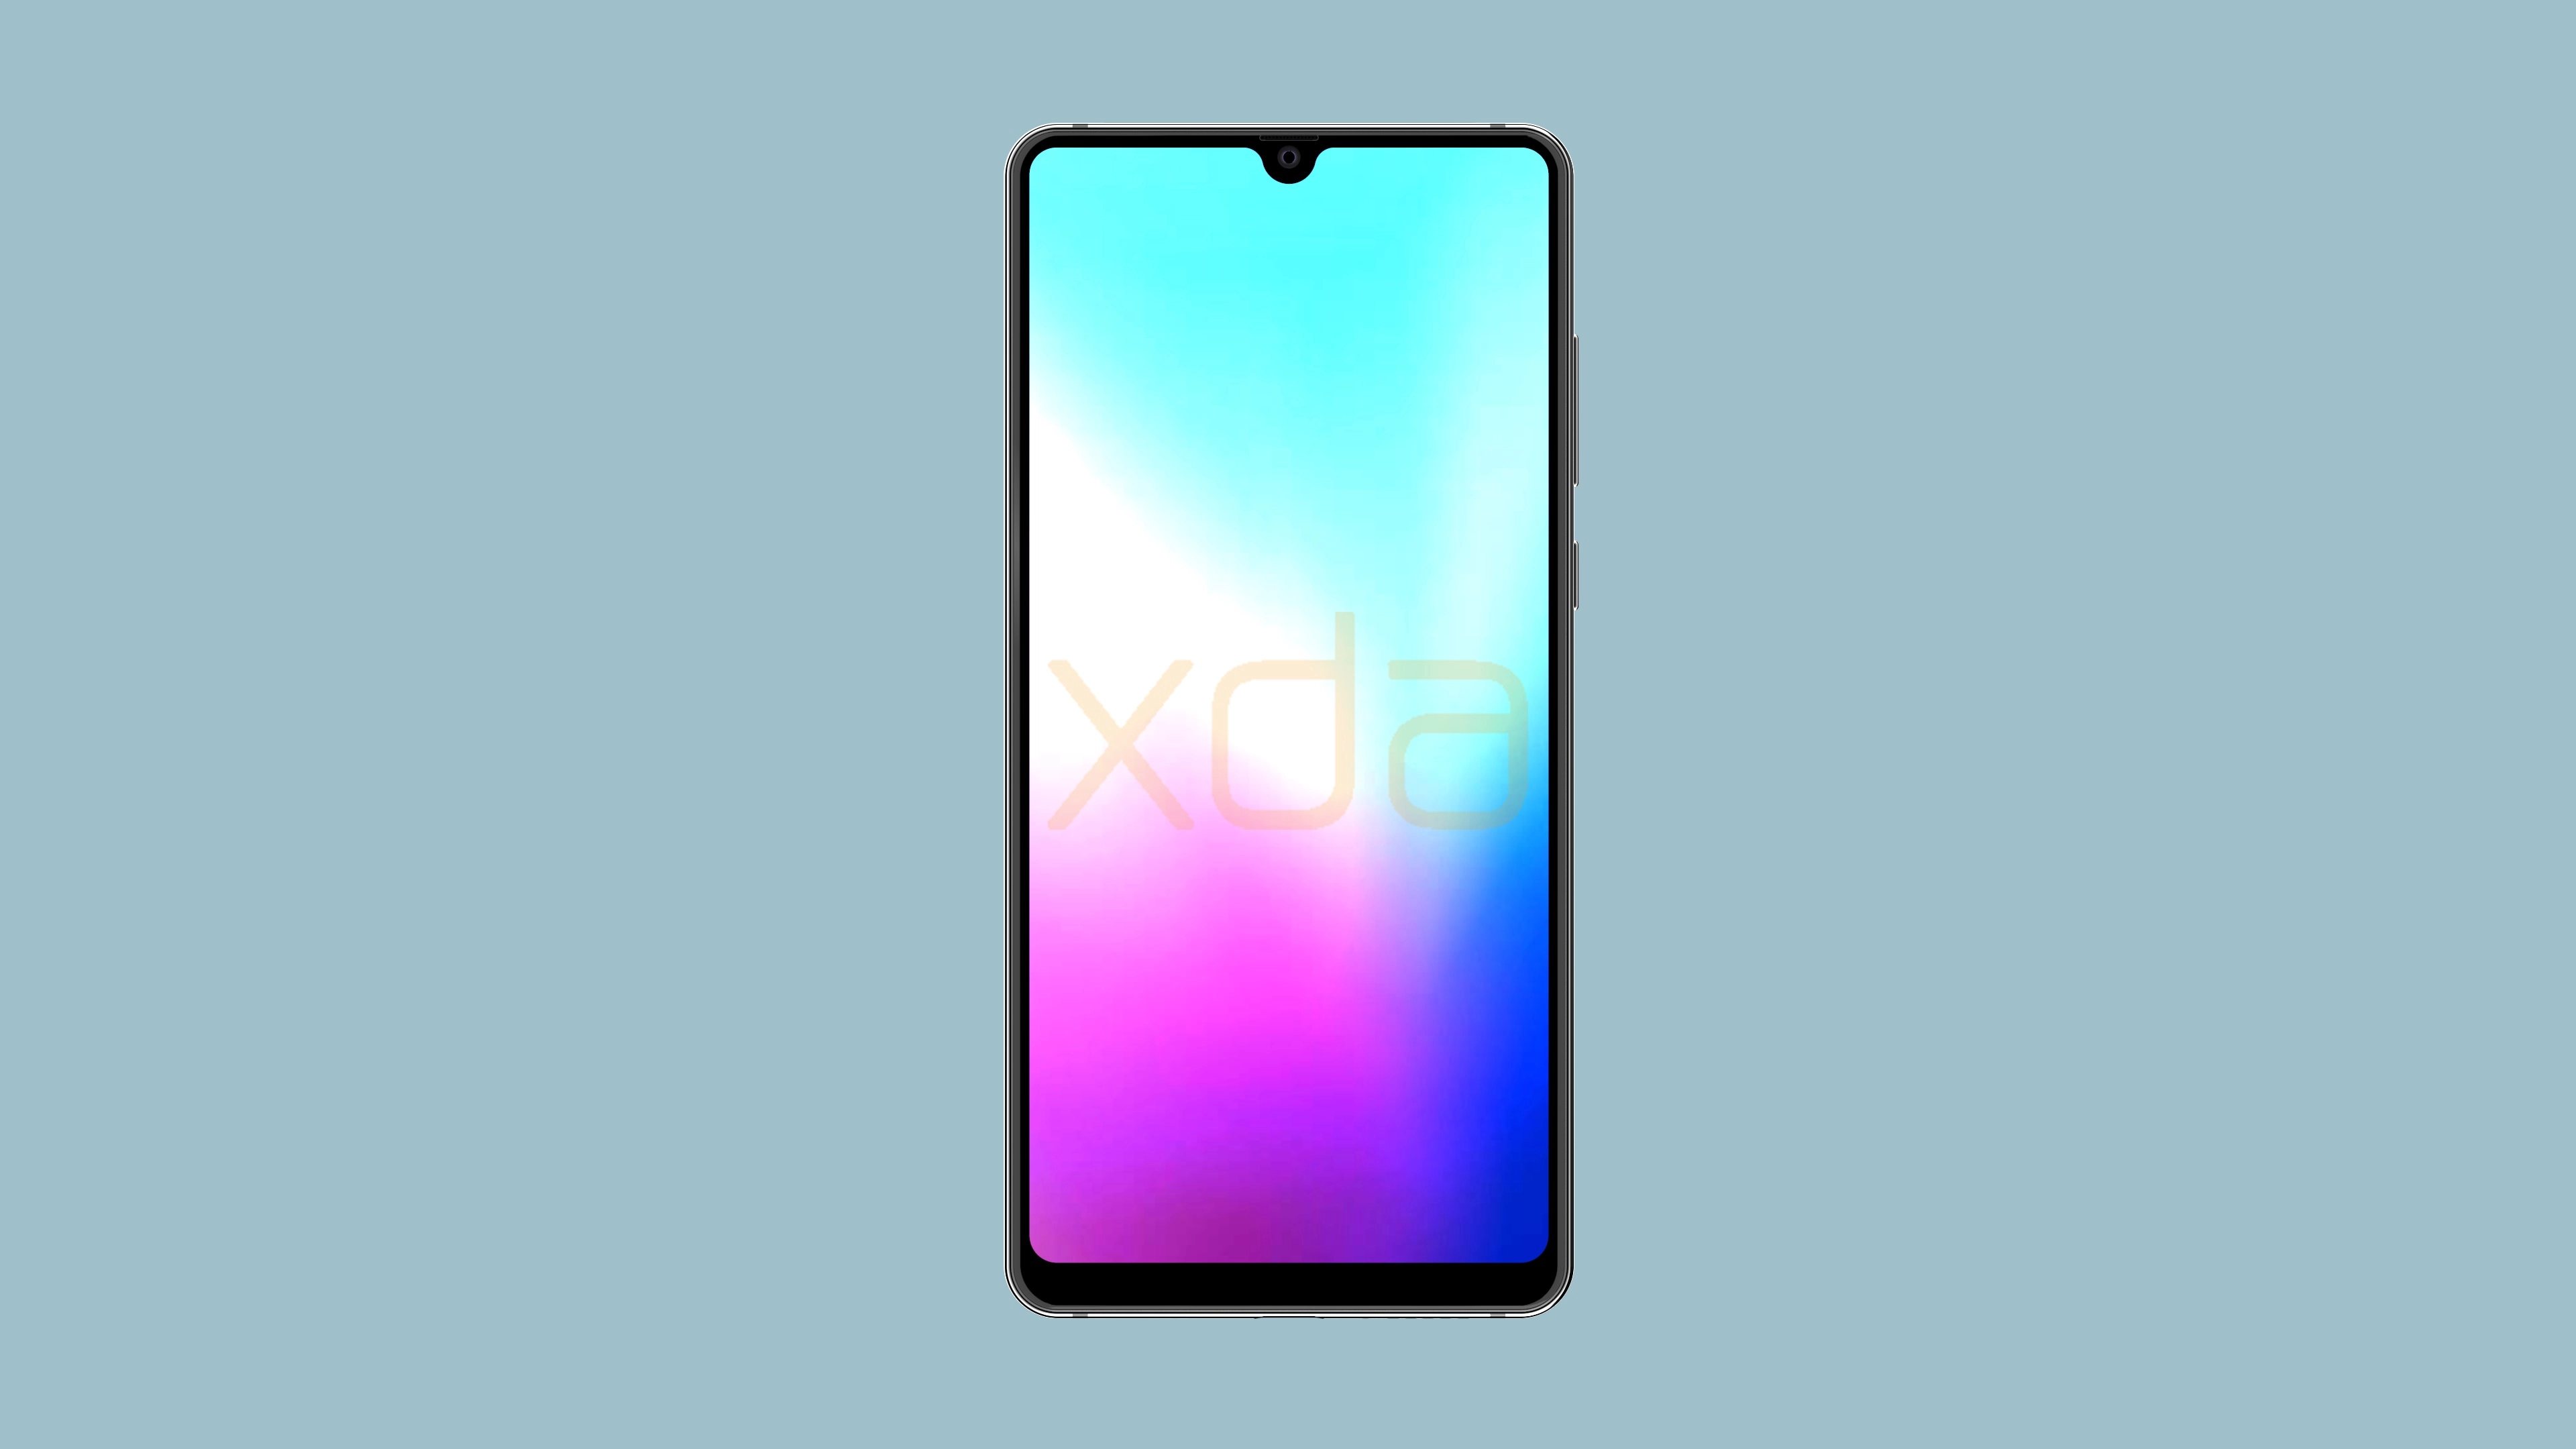 render of huawei mate 20 front with waterdrop notch and bezelless screen